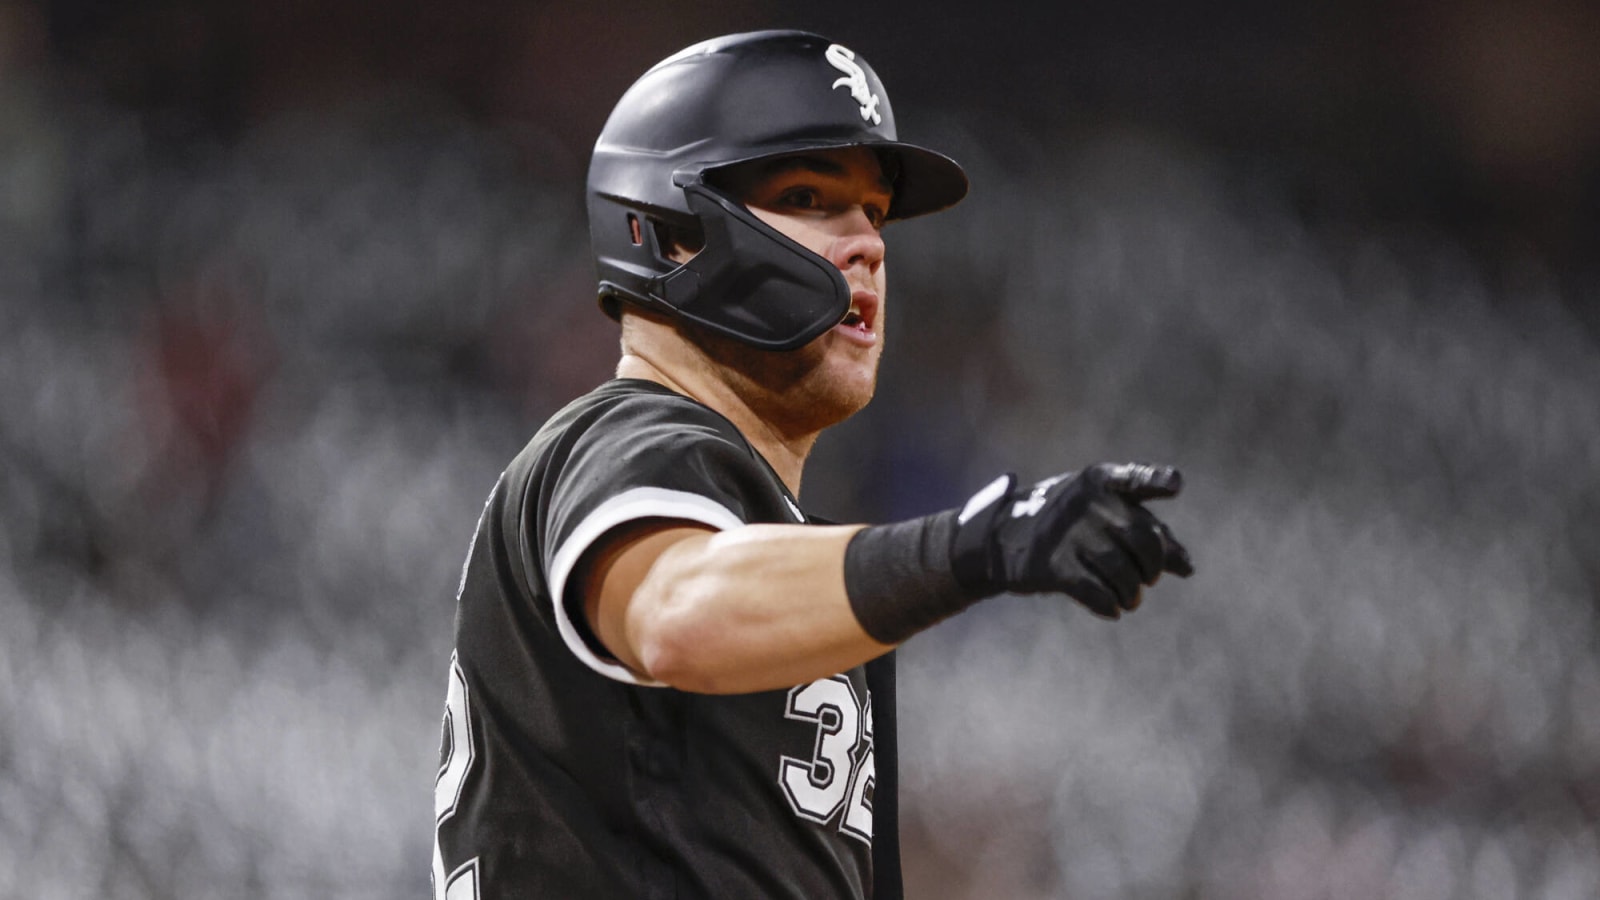 Gavin Sheets Explains Where The White Sox Went Wrong